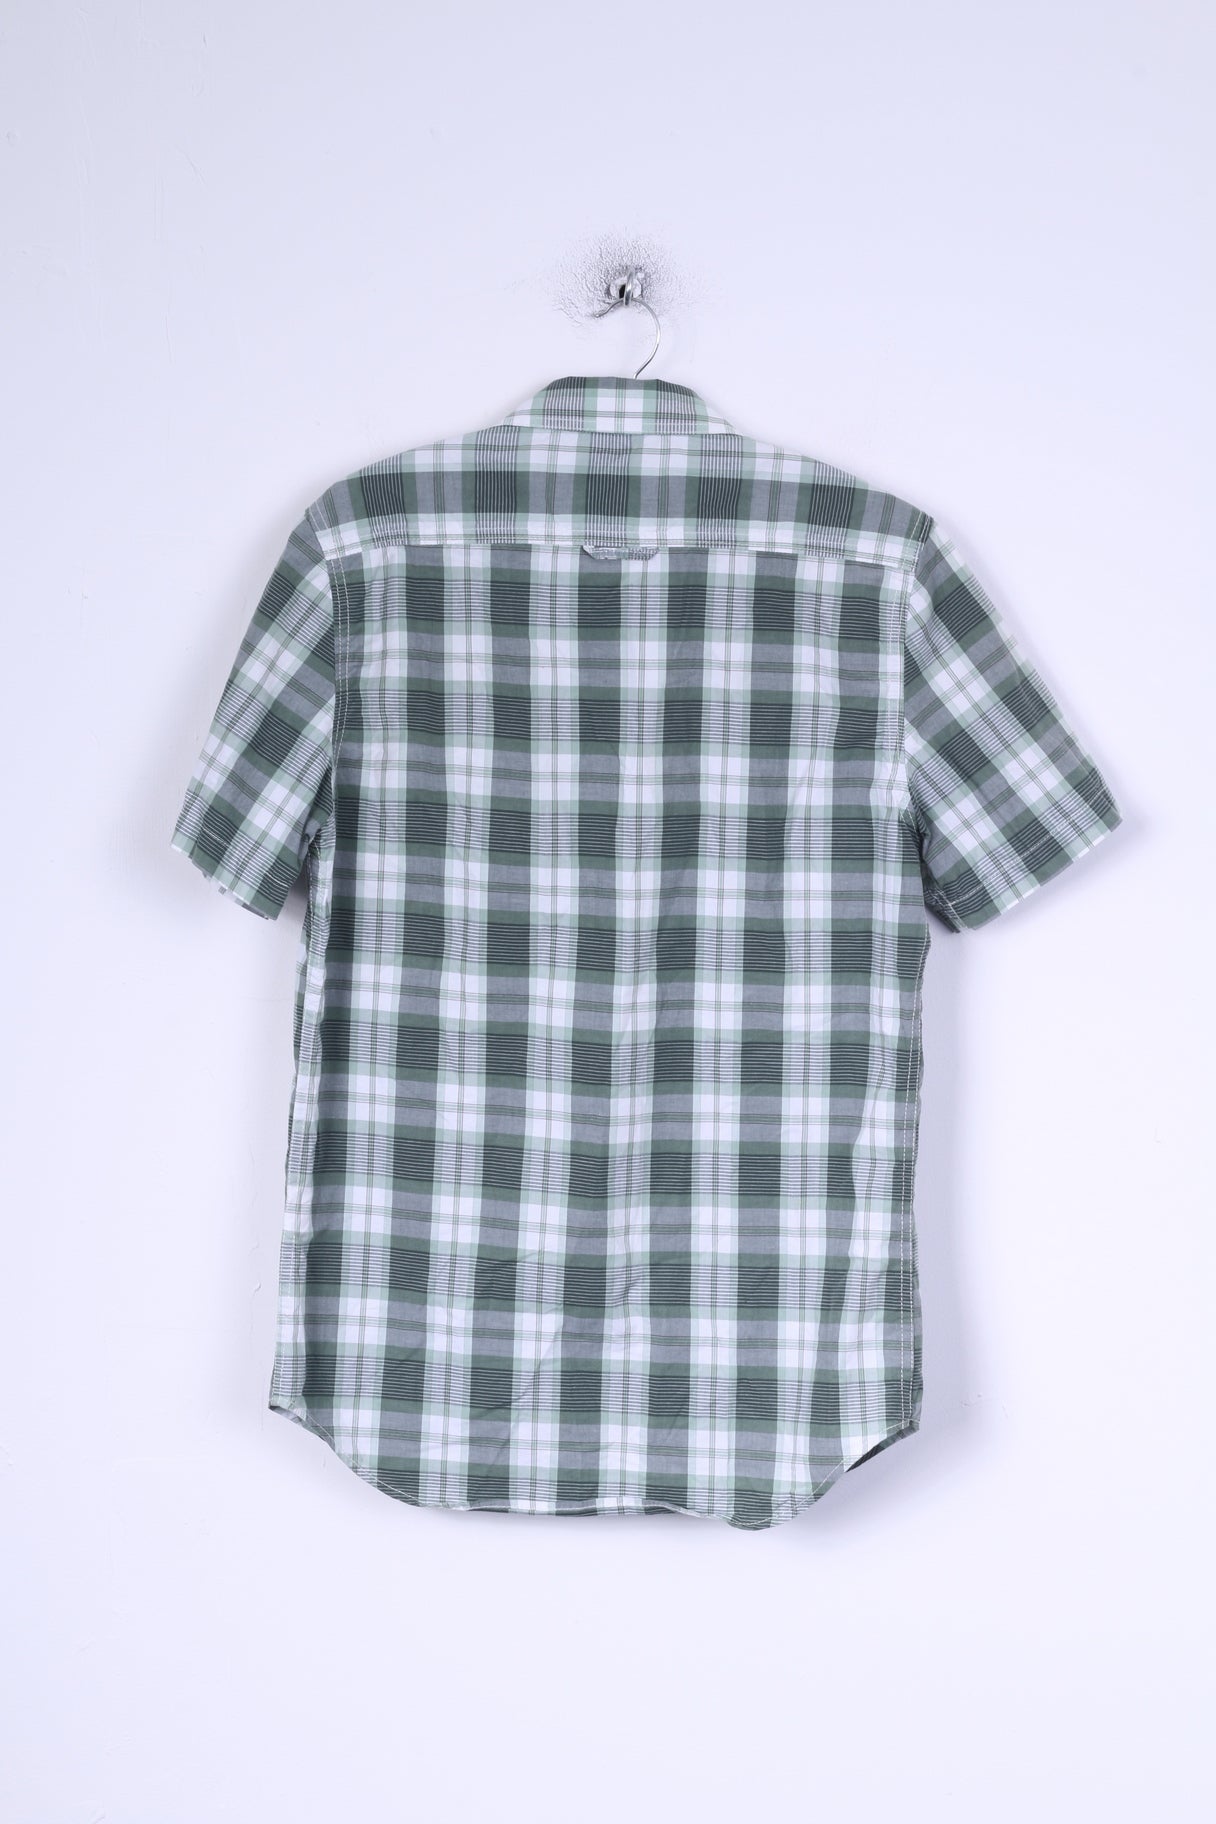 Superdry Chemise Casual M Homme Vert Checkered Cotton Japan In Spirit